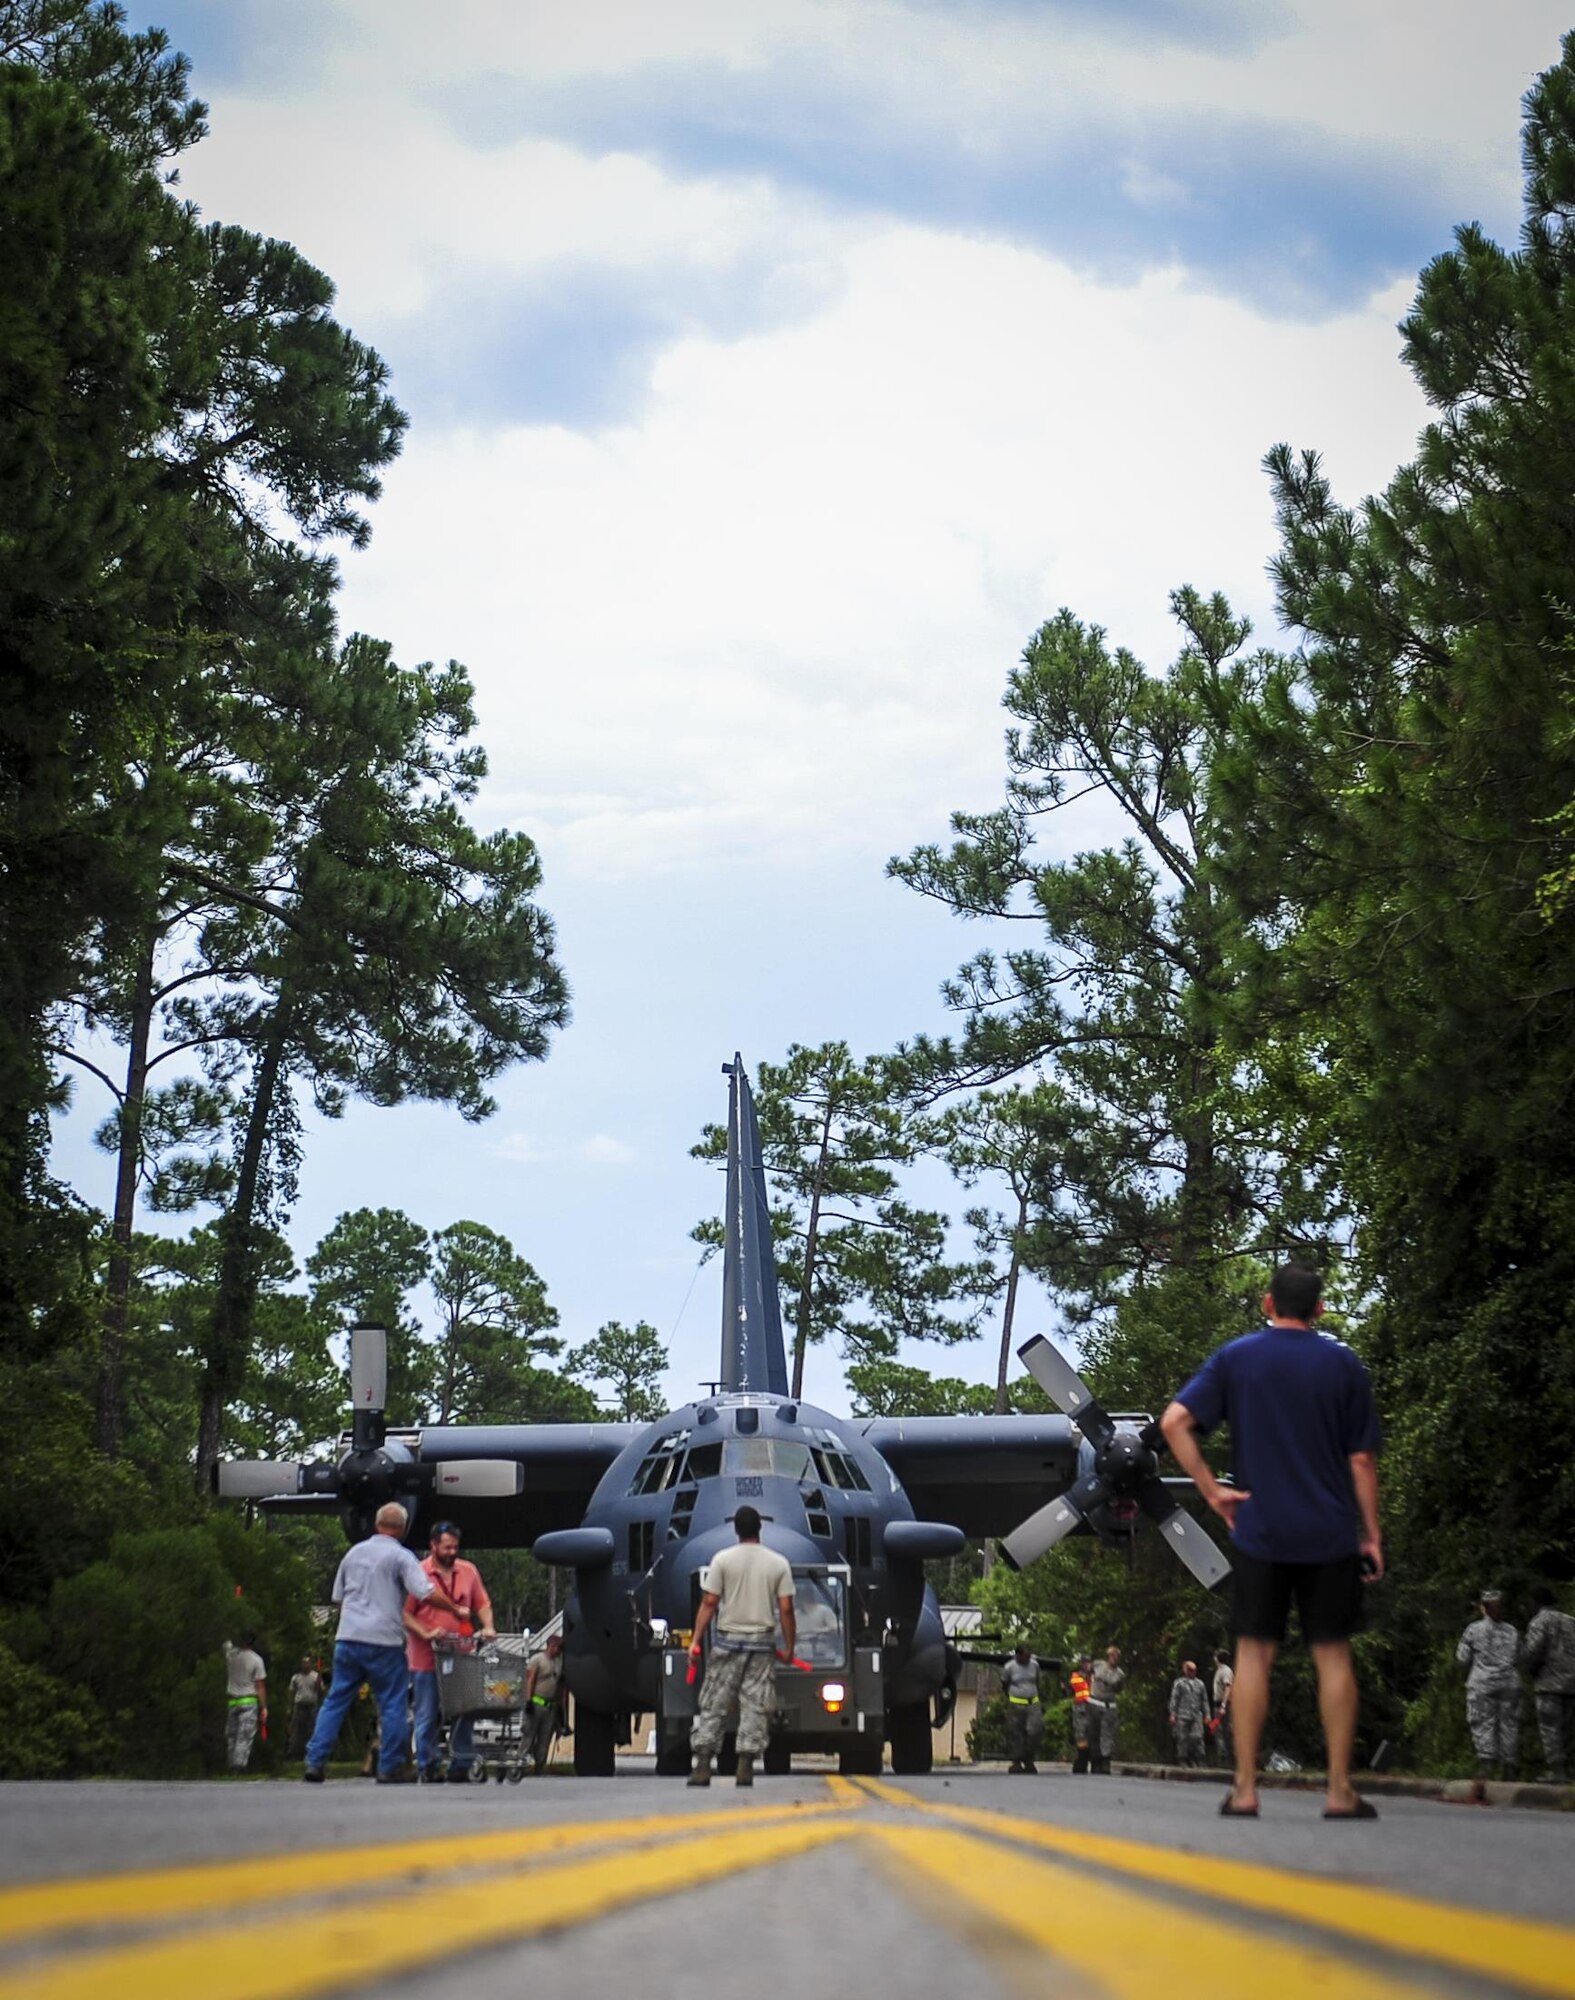 An AC-130H Spectre is towed down Independence Road on Hurlburt Field, Fla., Aug. 15, 2015. The Spectre was towed from the flightline and staged for installation in to the Hurlburt Field Air Park. The AC-130H fleet retired May 26, 2015, after more than 45 years of service. The installation process for this aircraft, known as “Wicked Wanda,” is set to be complete by Aug. 28, 2015. (U.S. Air Force photo by Senior Airman Meagan Schutter/Released)